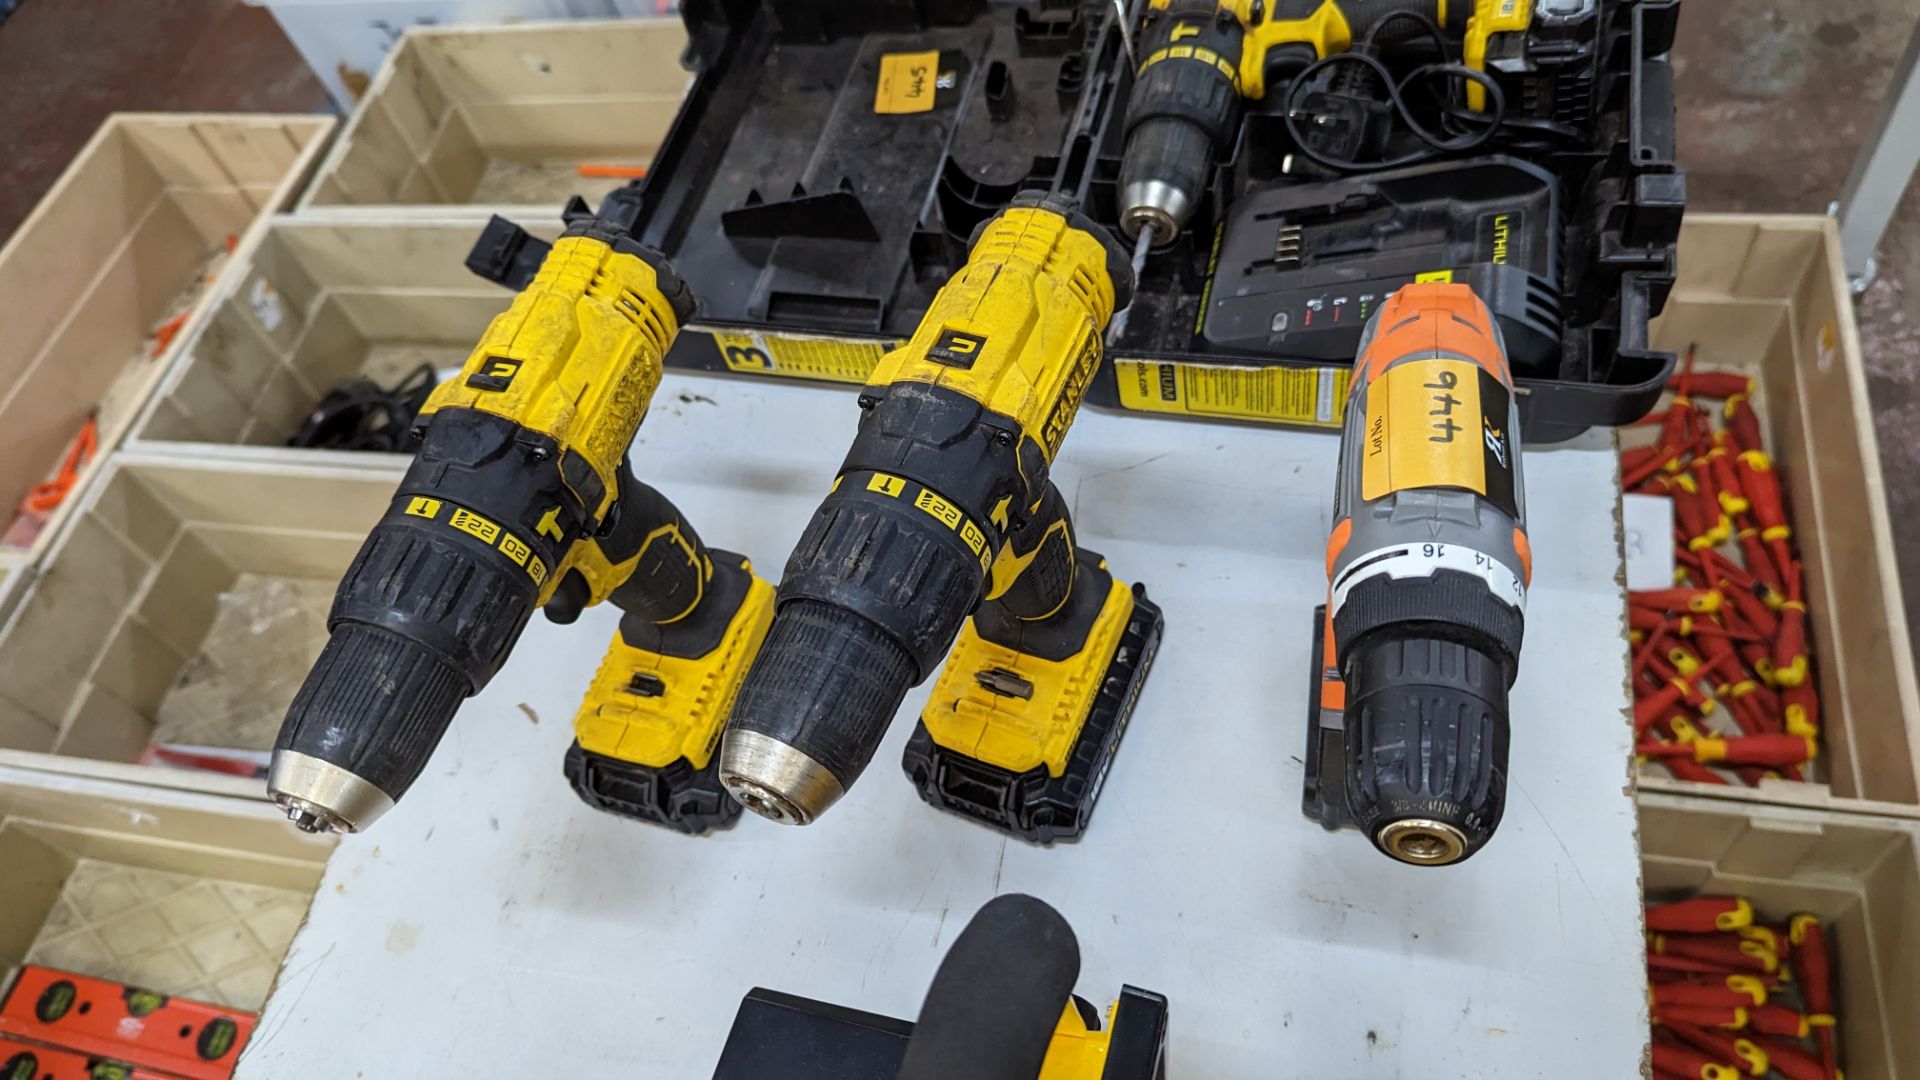 3 off 18 volt lithium cordless drills. Each drill includes an 18 volt lithium battery. This lot do - Image 5 of 7